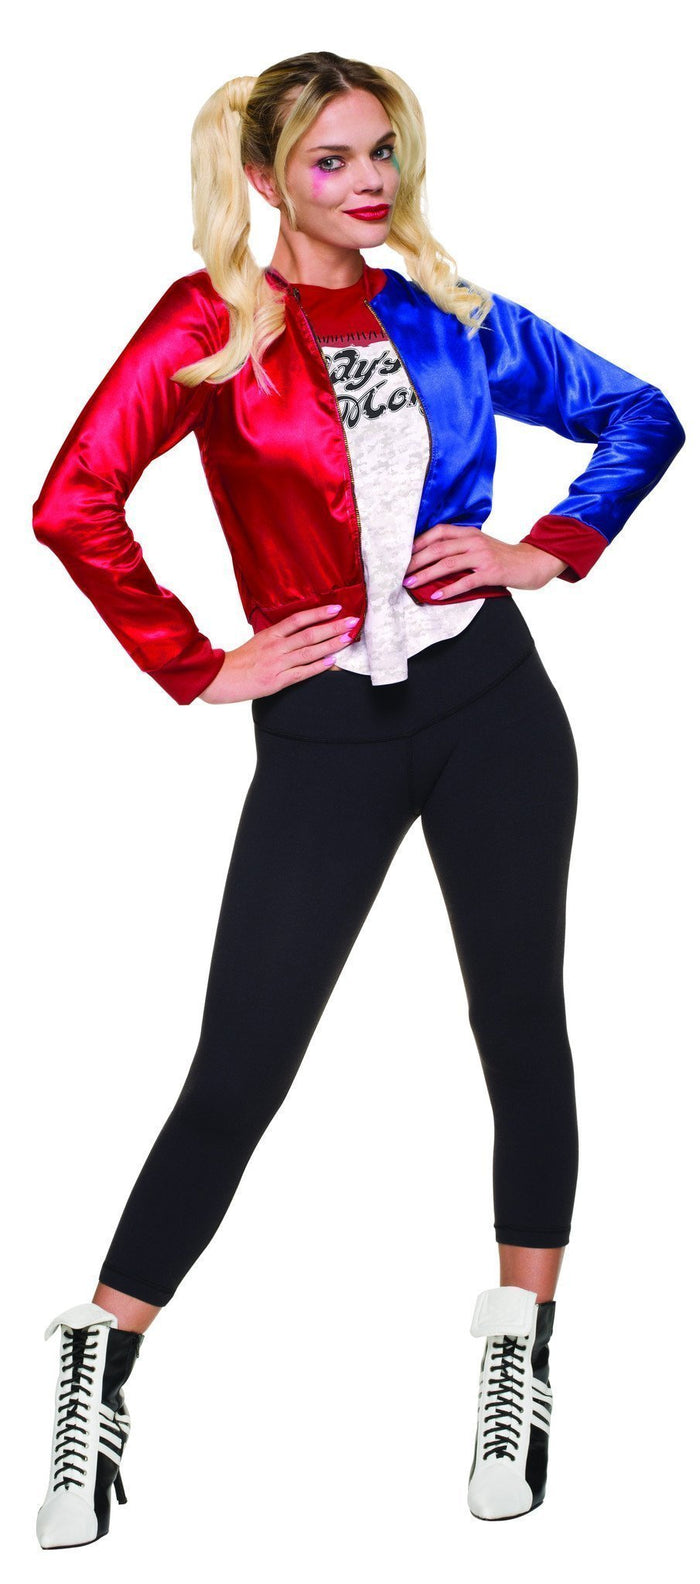 Harley Quinn Costume Kit for Adults - Warner Bros Suicide Squad